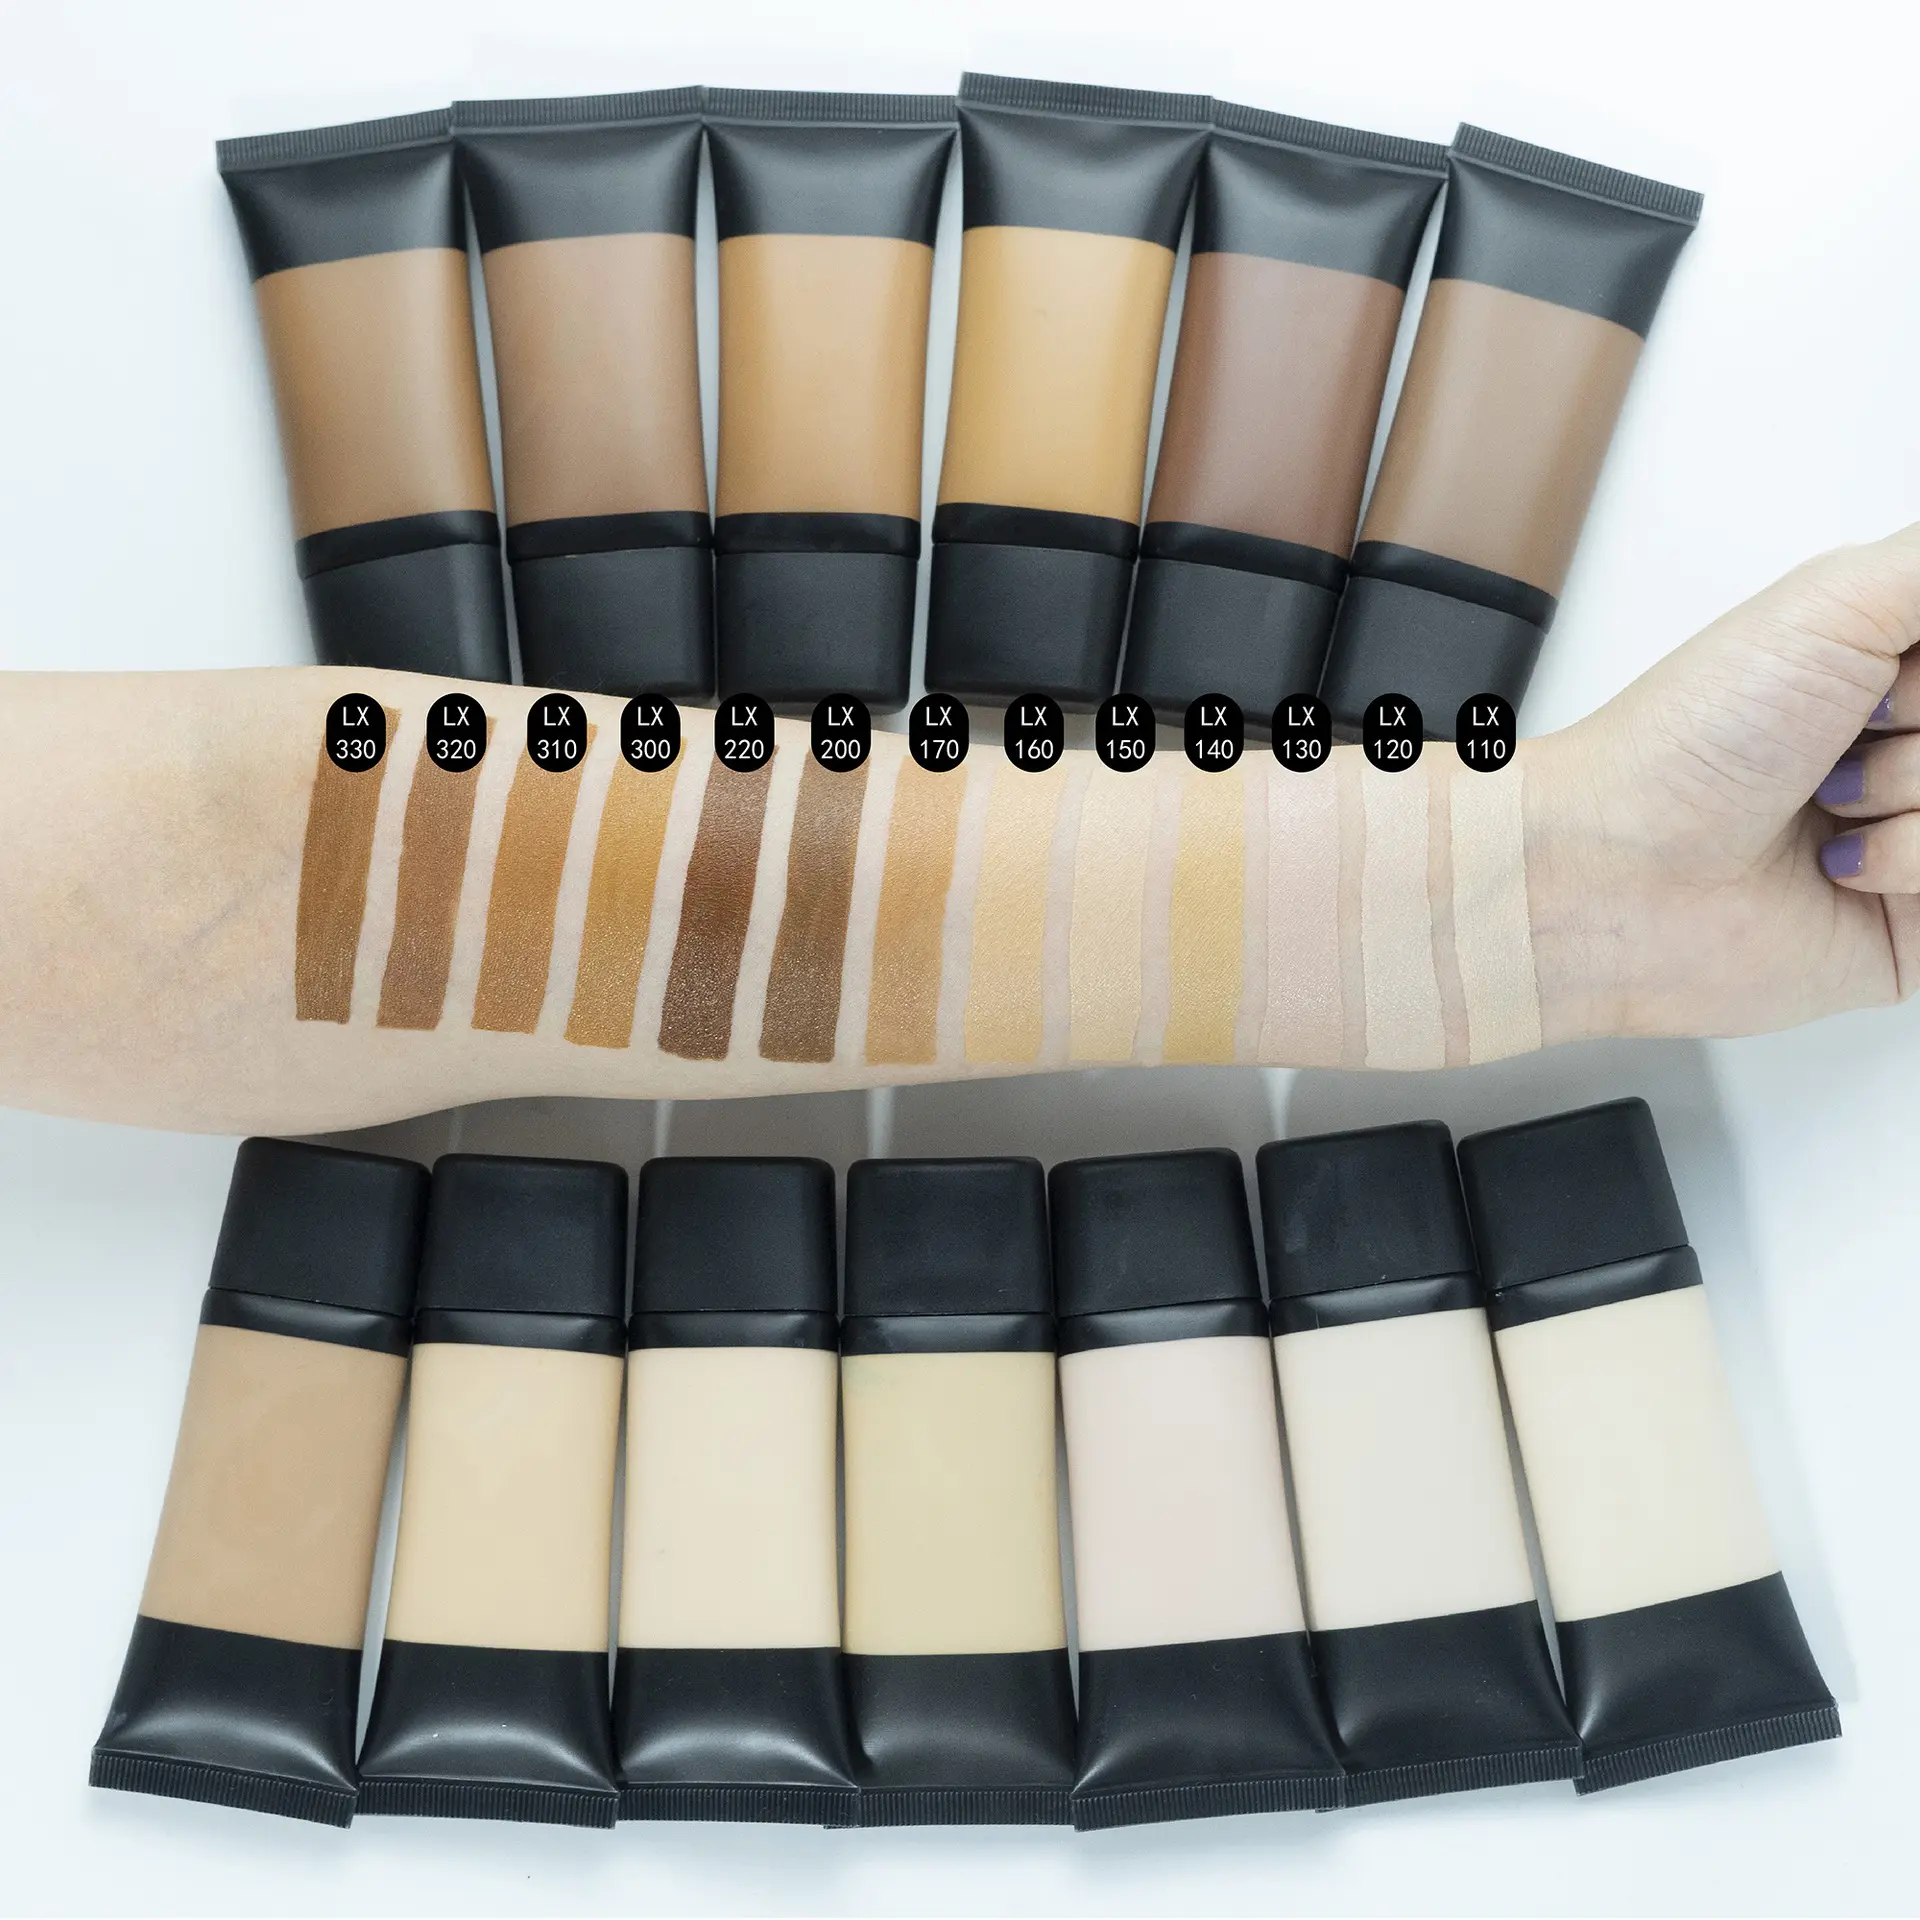 Private Label Make Up Beauty Products 13 Colors Full Coverage Liquid Foundation